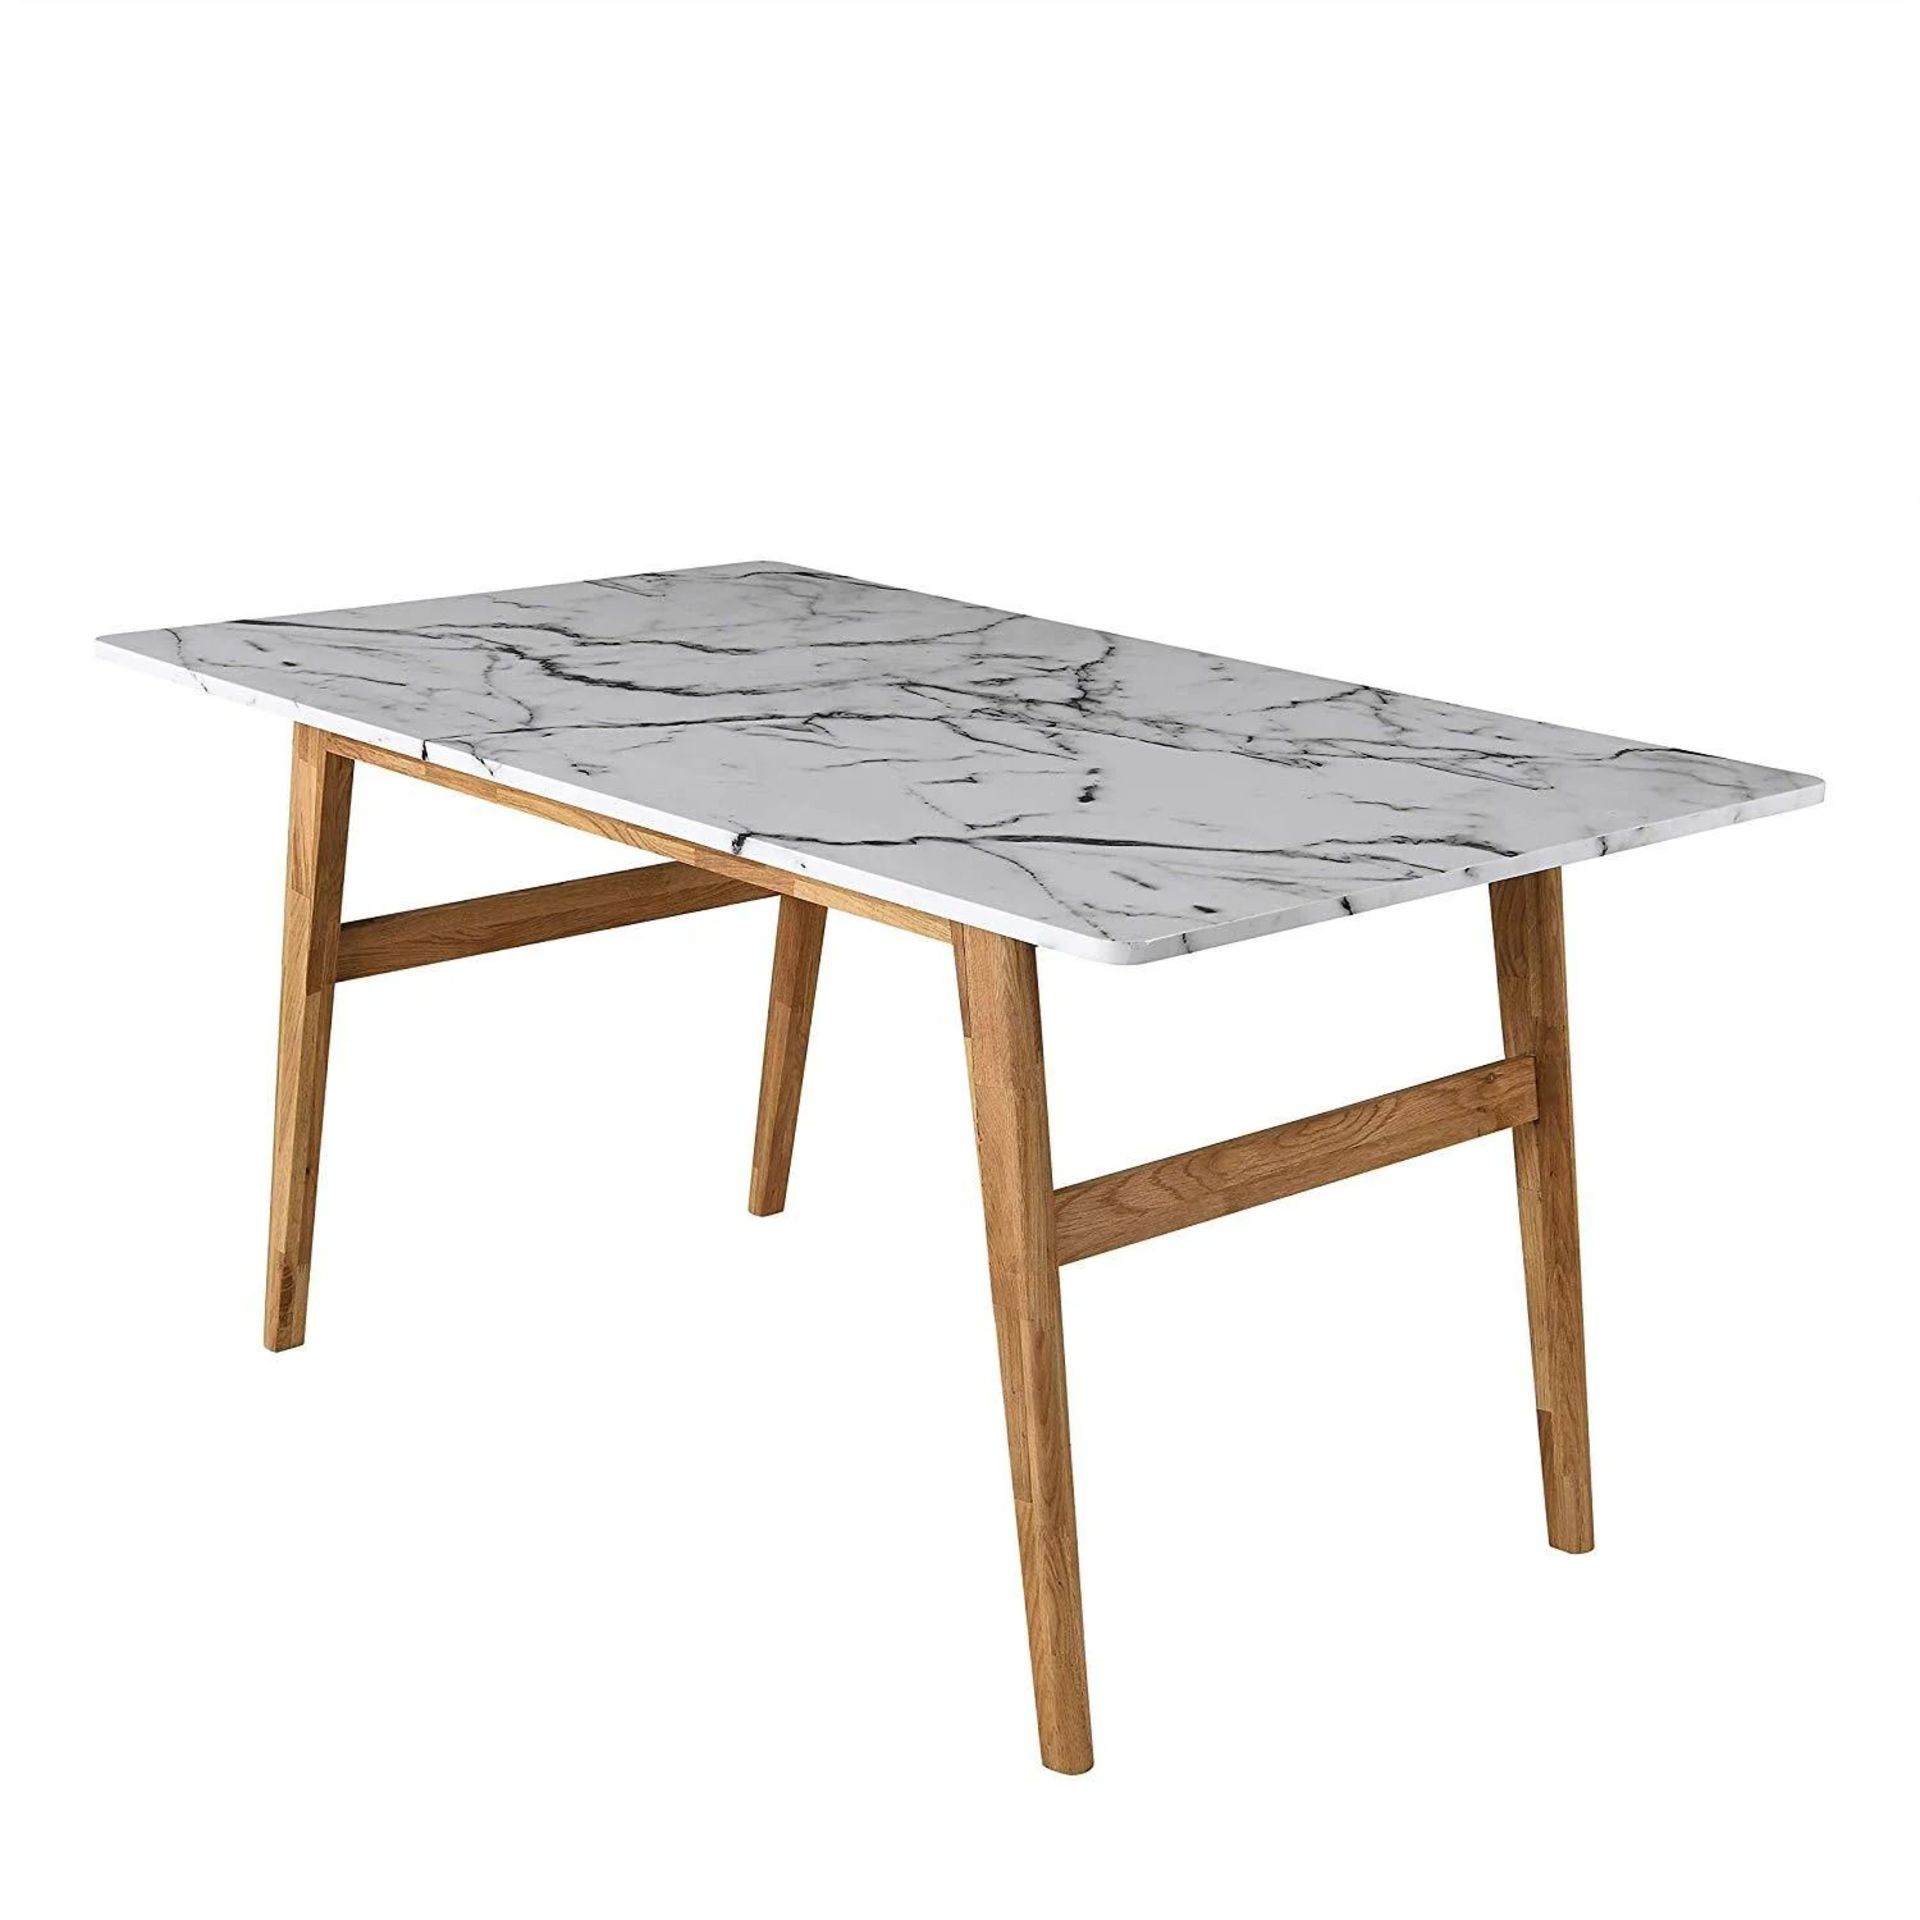 ASCONA White Marble Effect 6-Seater Dining Table with Solid Oak Legs. - ER30. RRP £449.99. The - Image 2 of 2